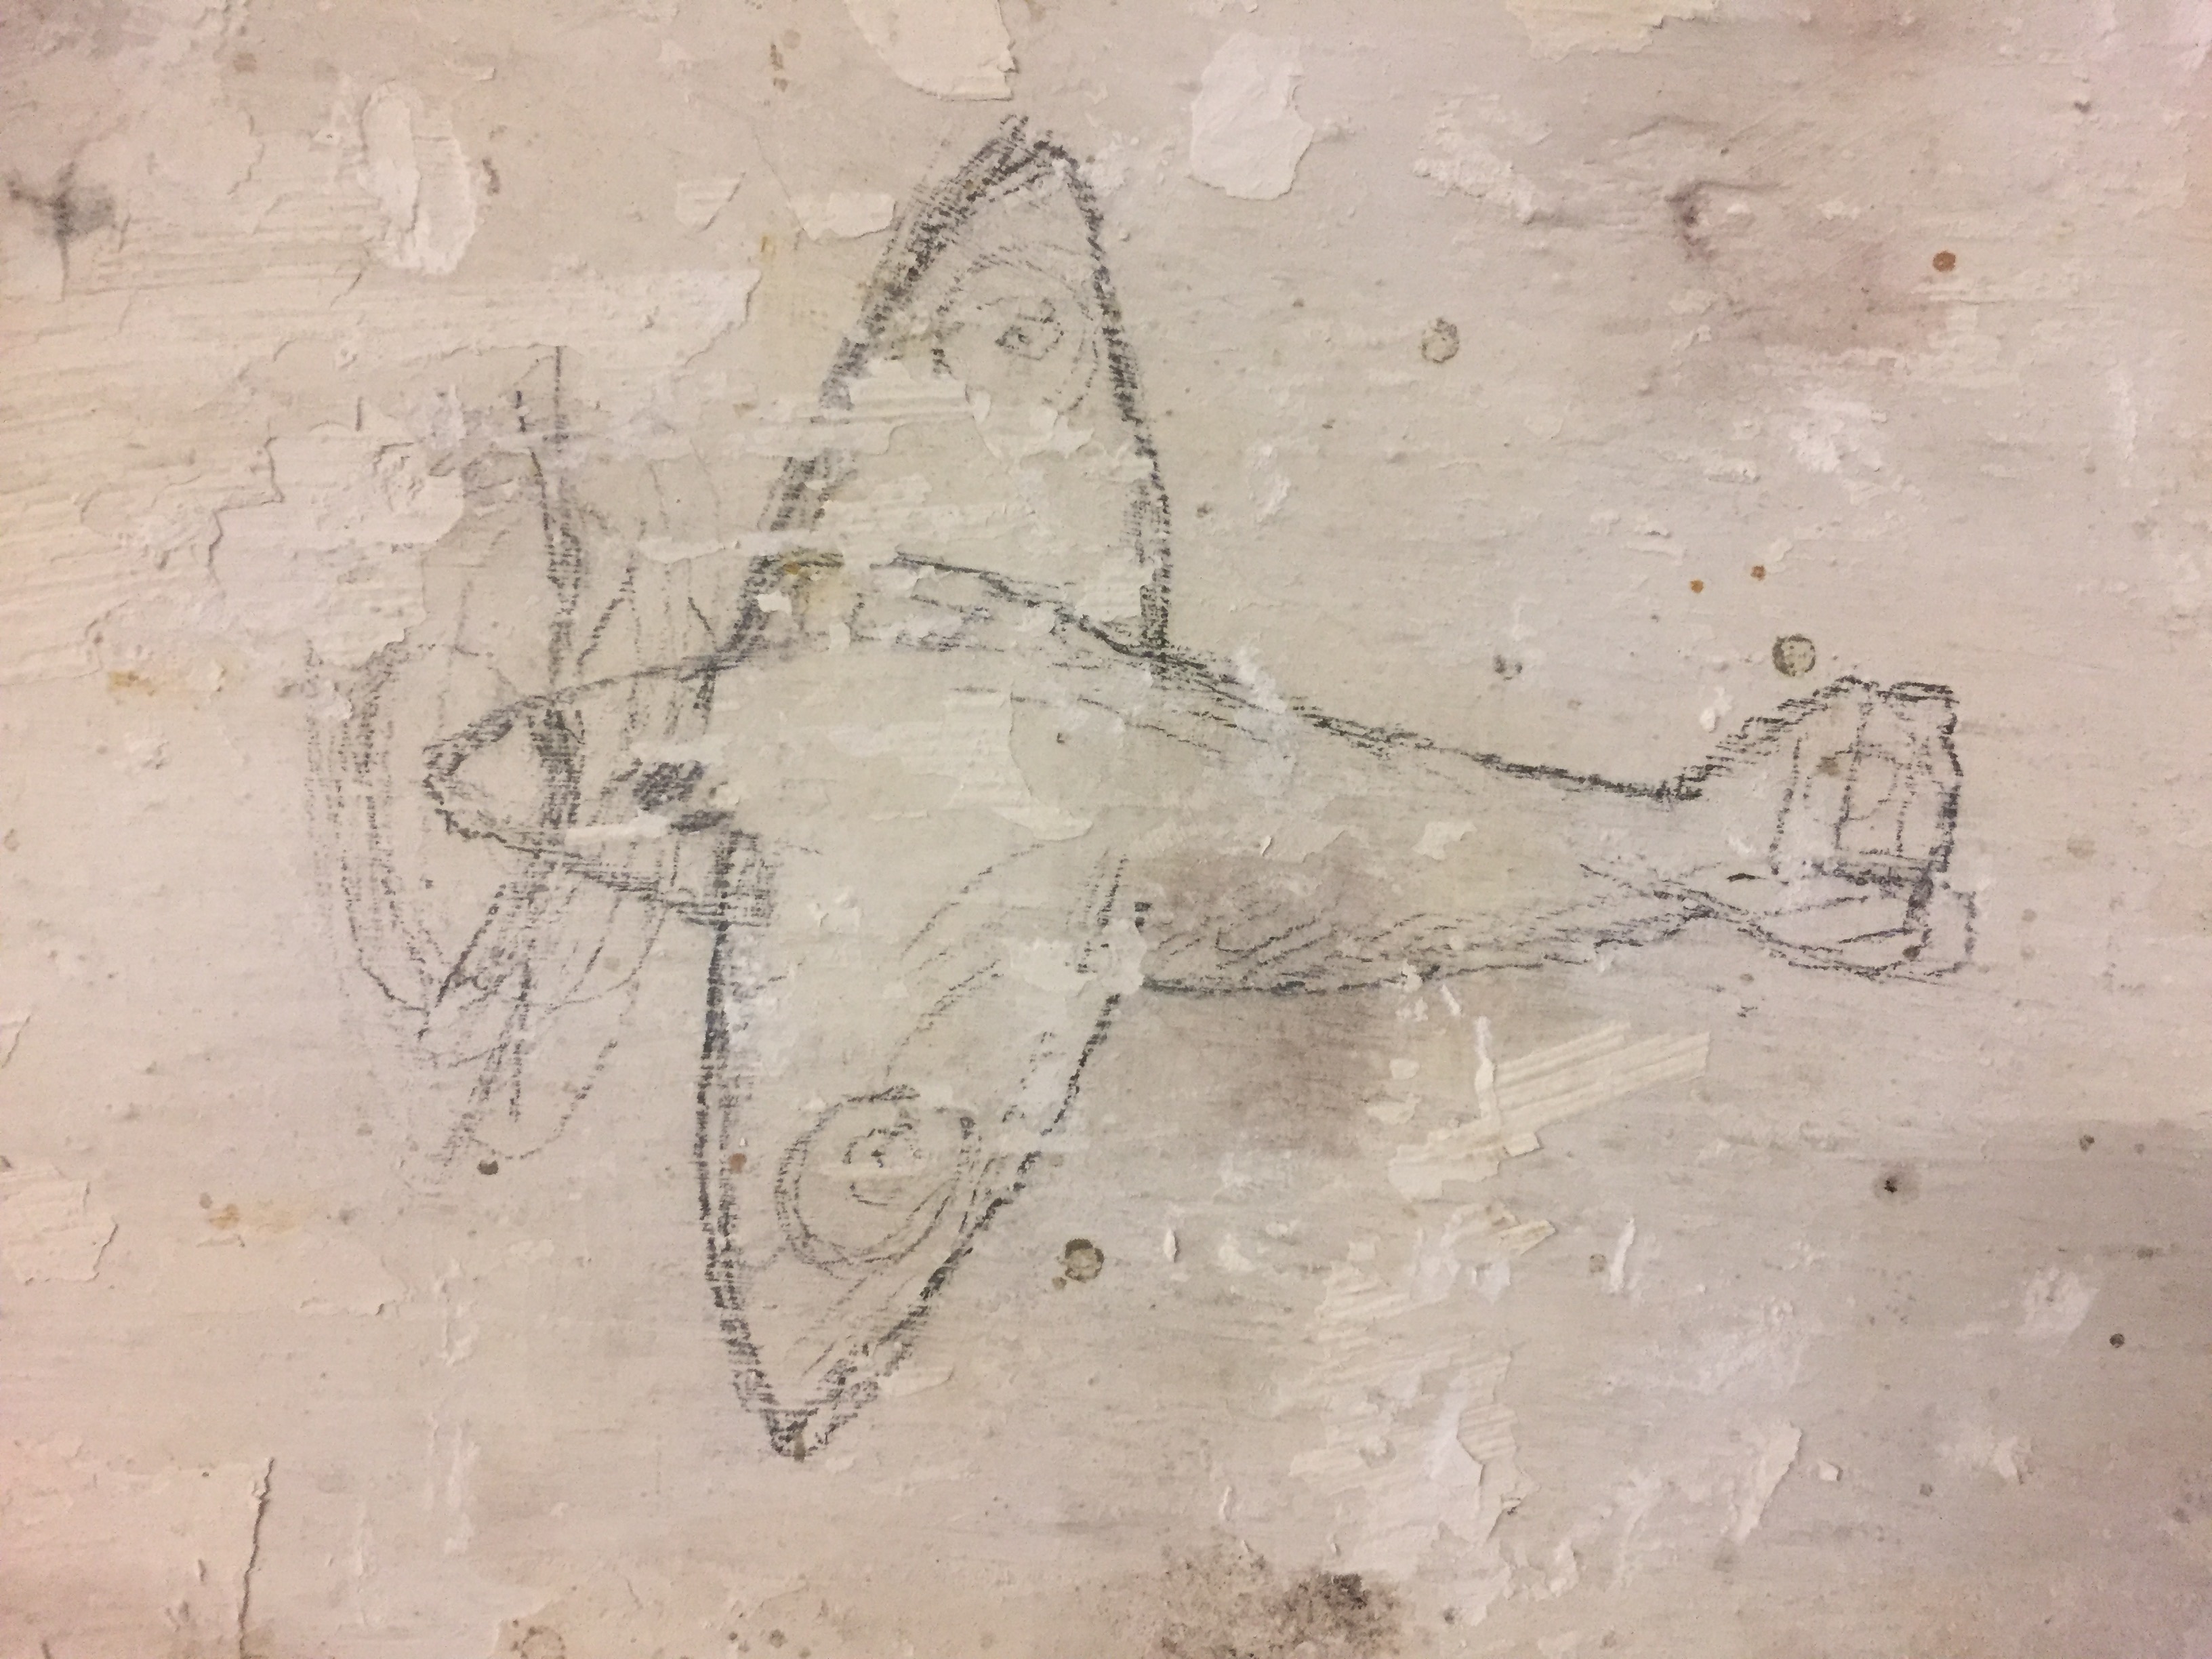 Drawing of an aircraft on a wall